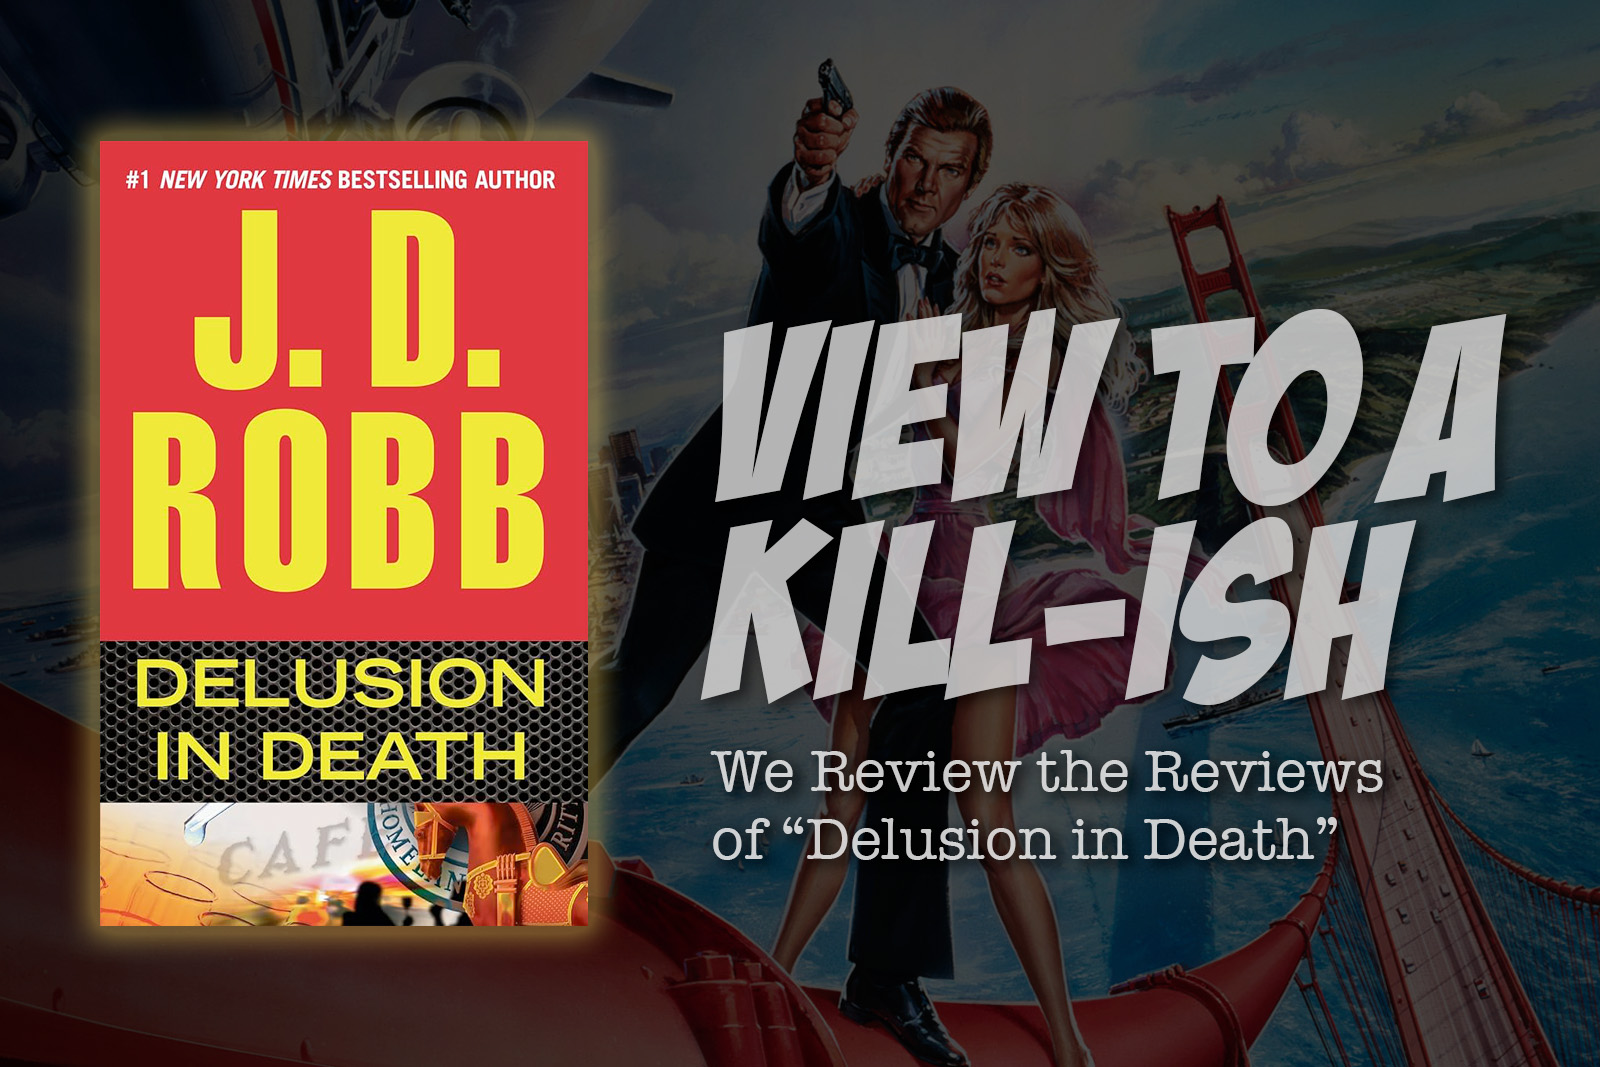 “View to a Kill-ish”: We Review the Reviews of “Delusion in Death”